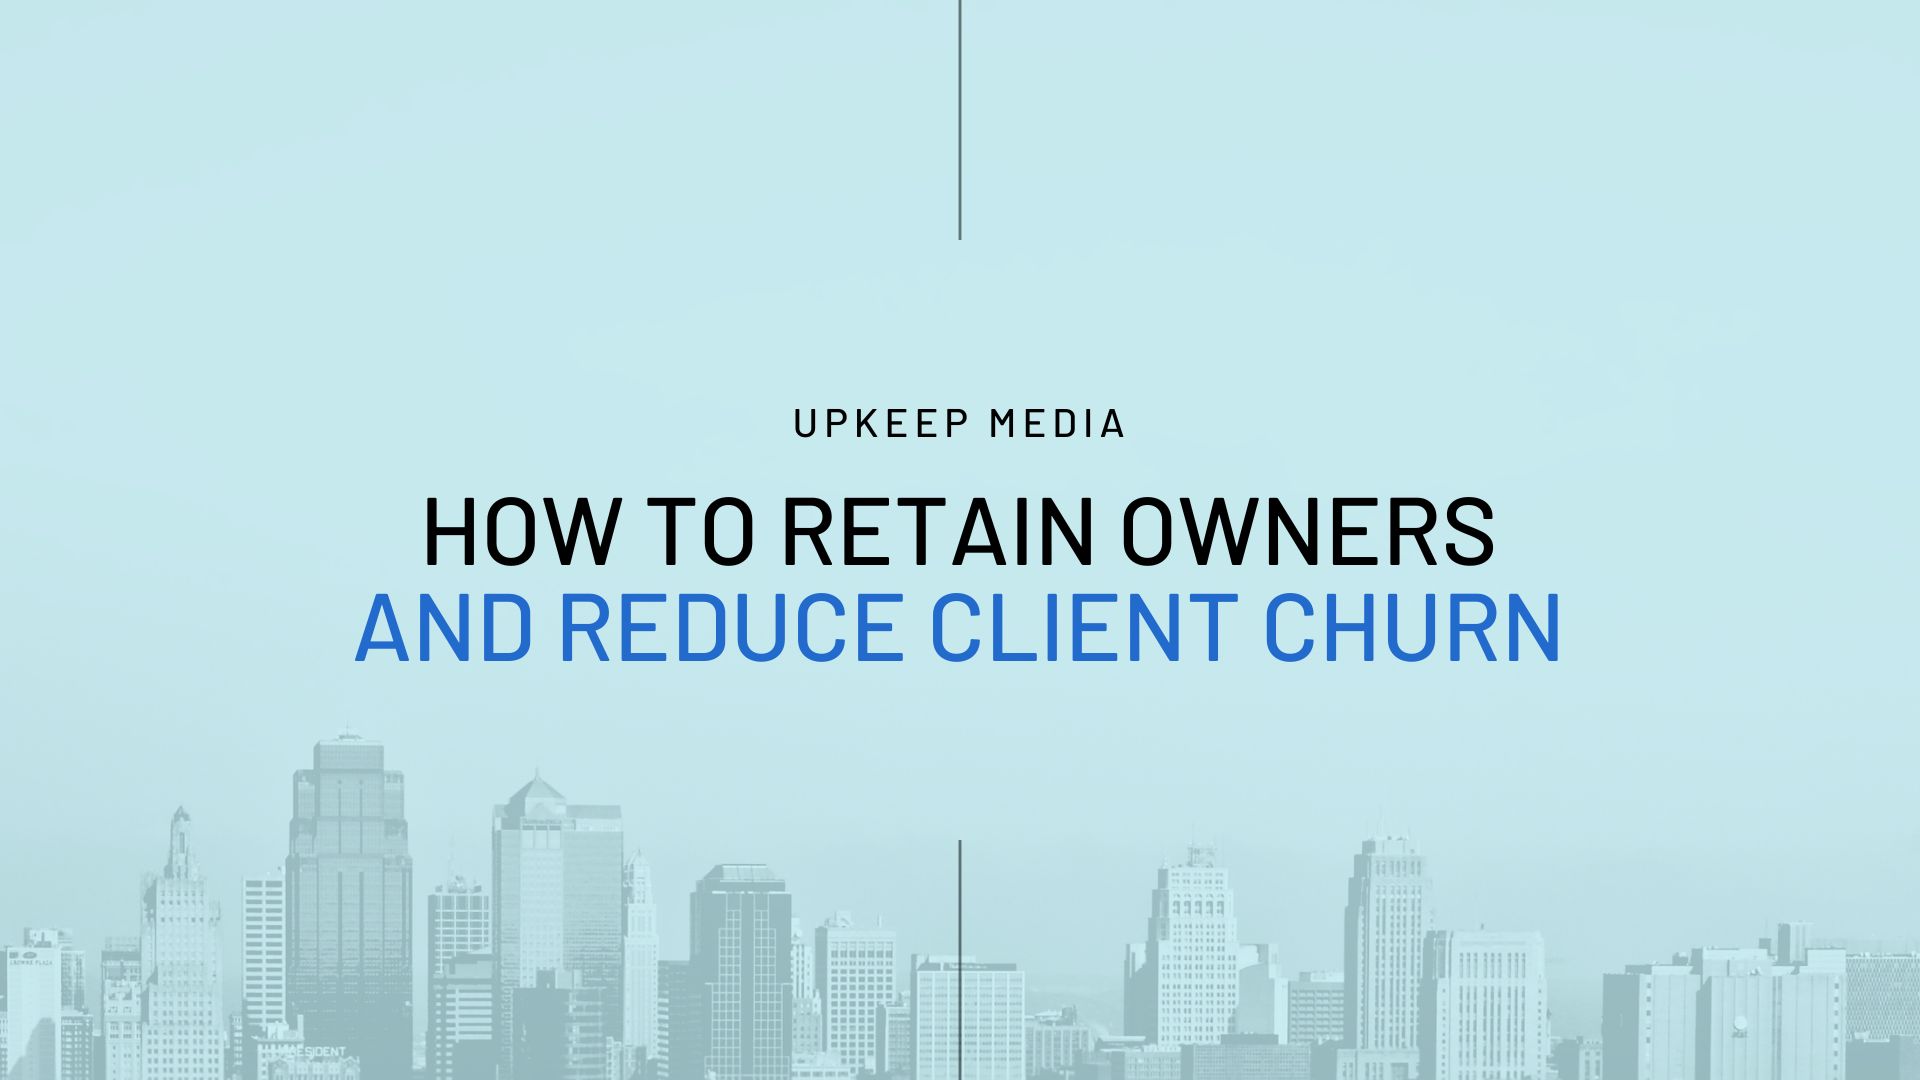 How to retain owners and reduce churn